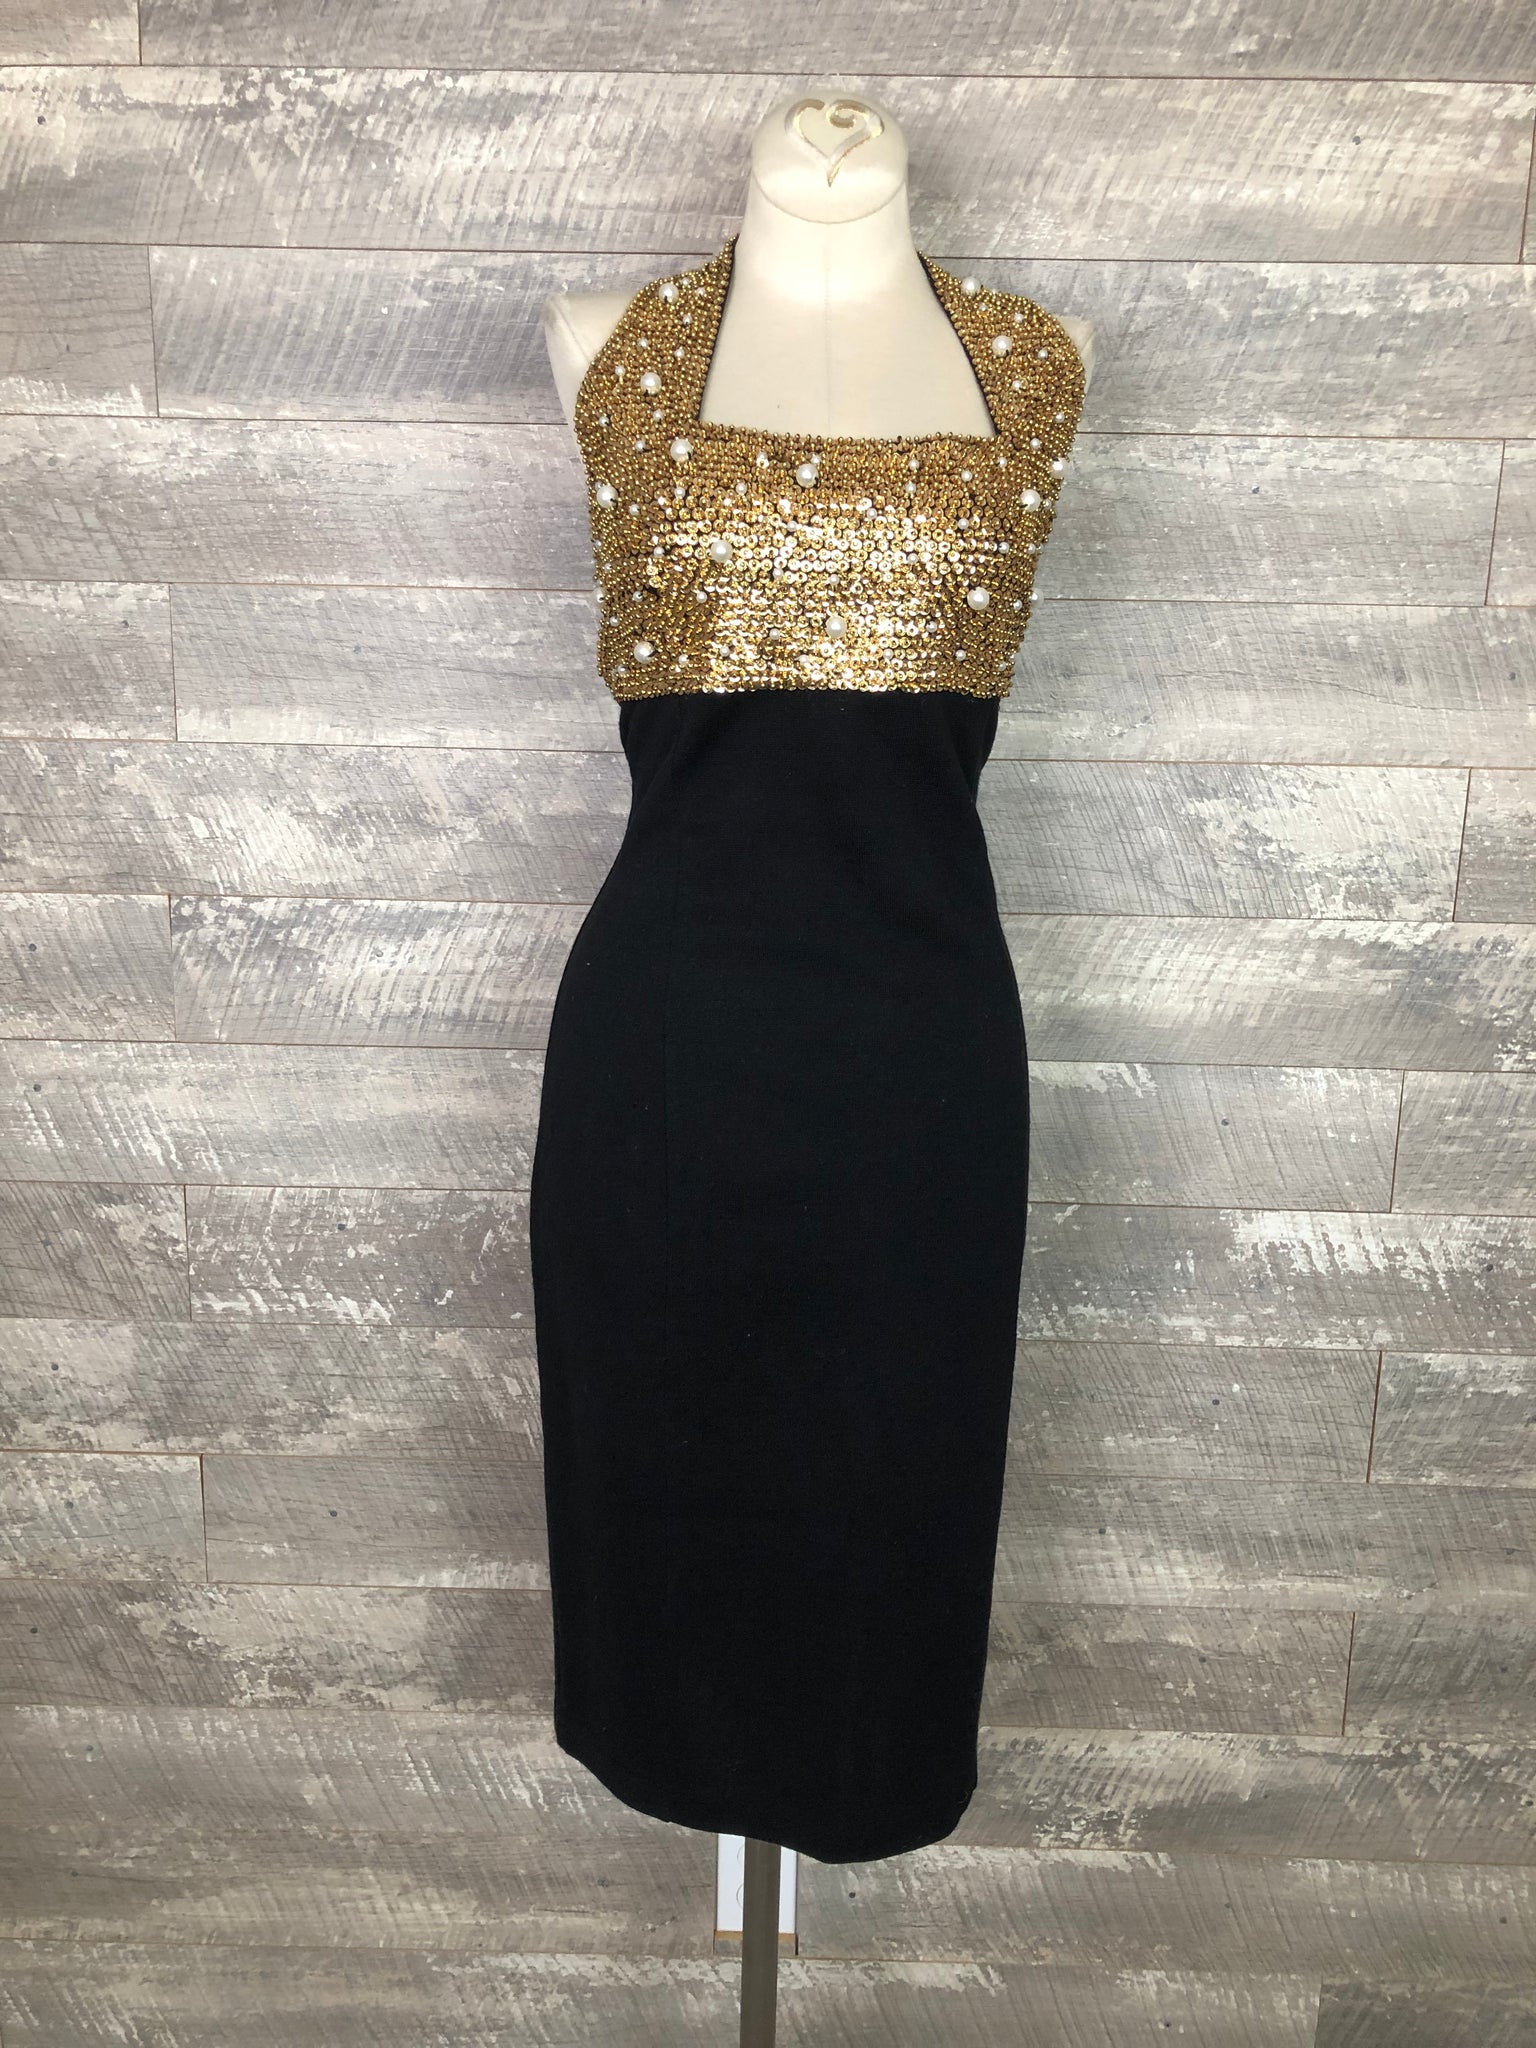 90s gold and pearl halter dress